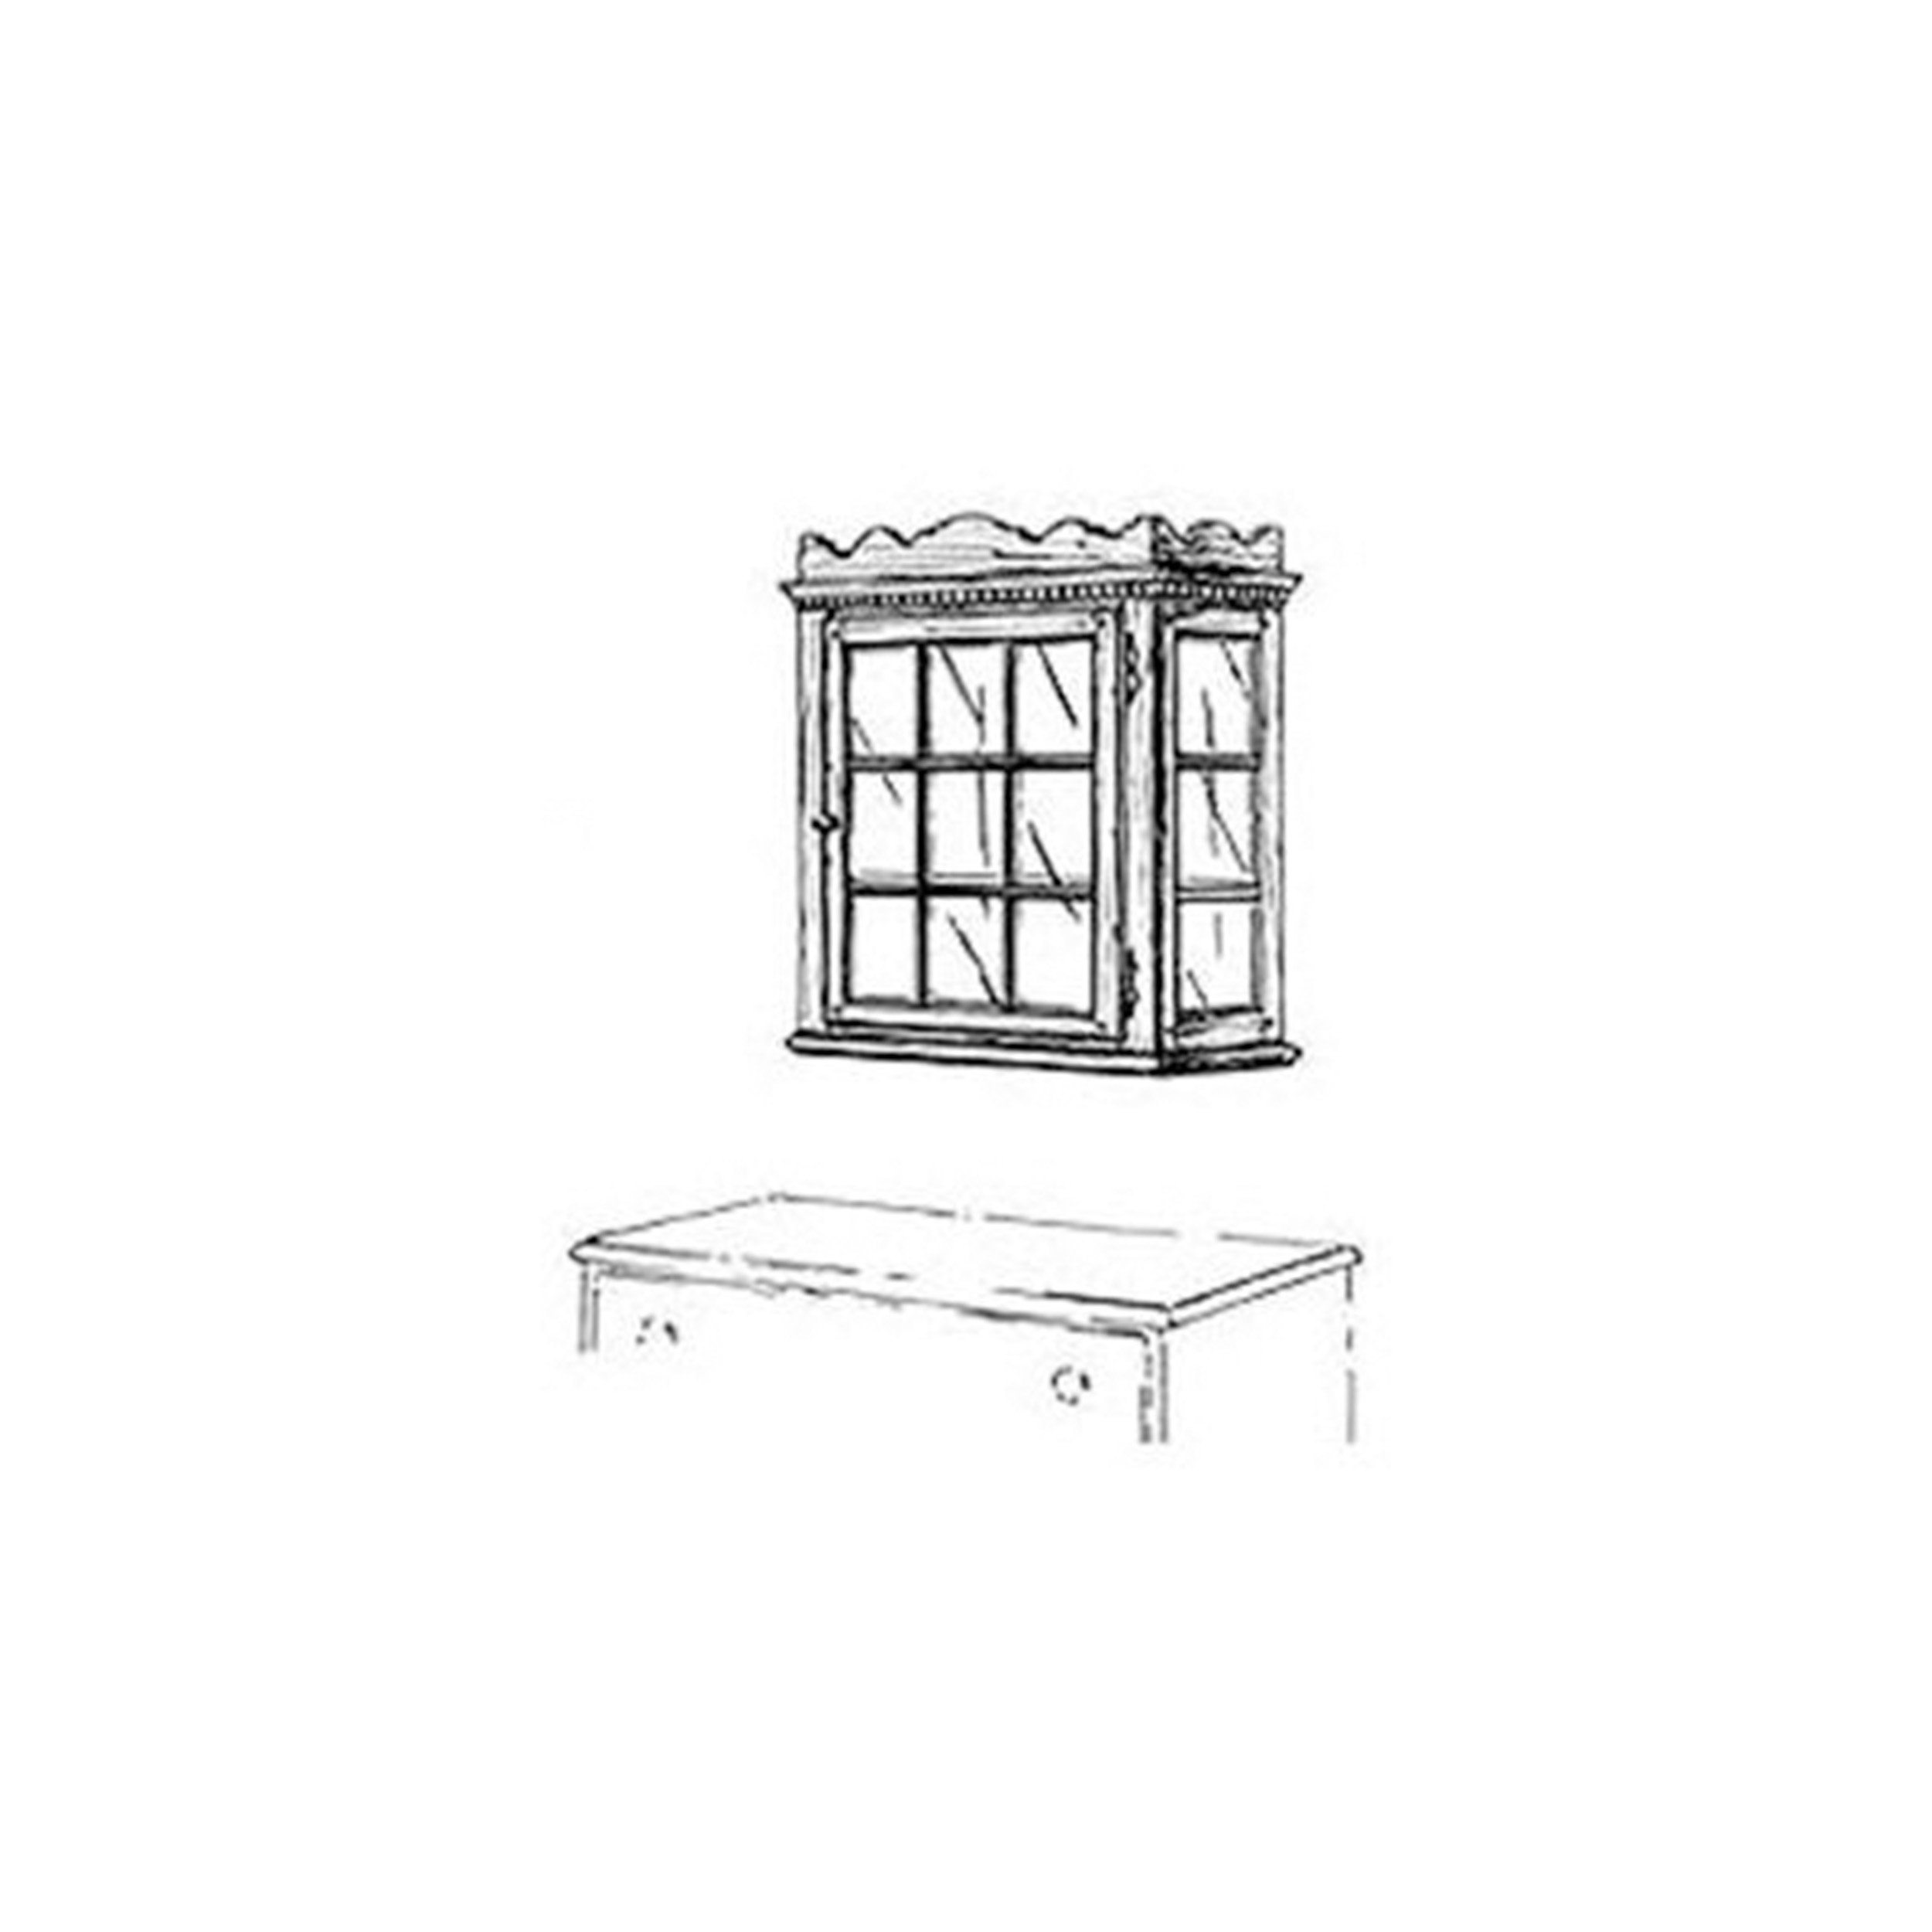 Woodworking Project Paper Plan To Build Hanging Curio Cabinet